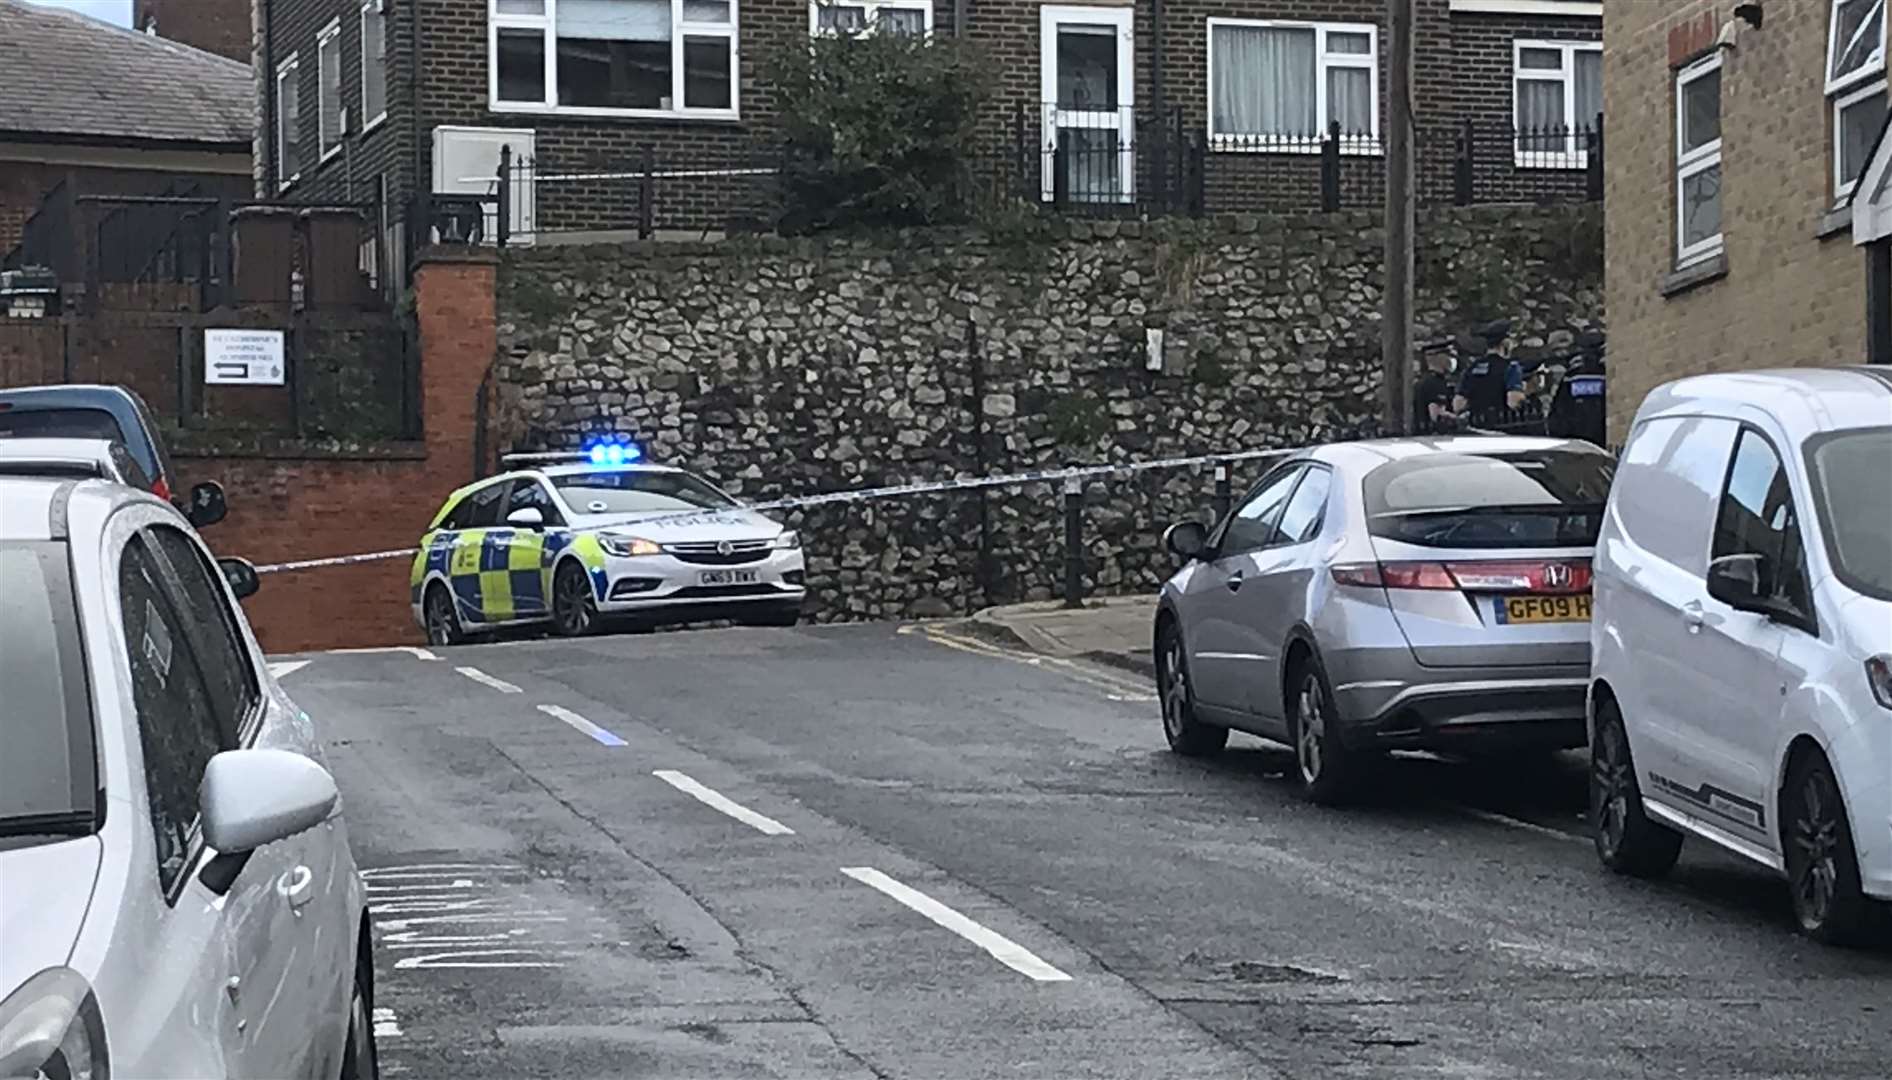 Officers were seen at the junction of Delce Road and Foord Street on Sunday